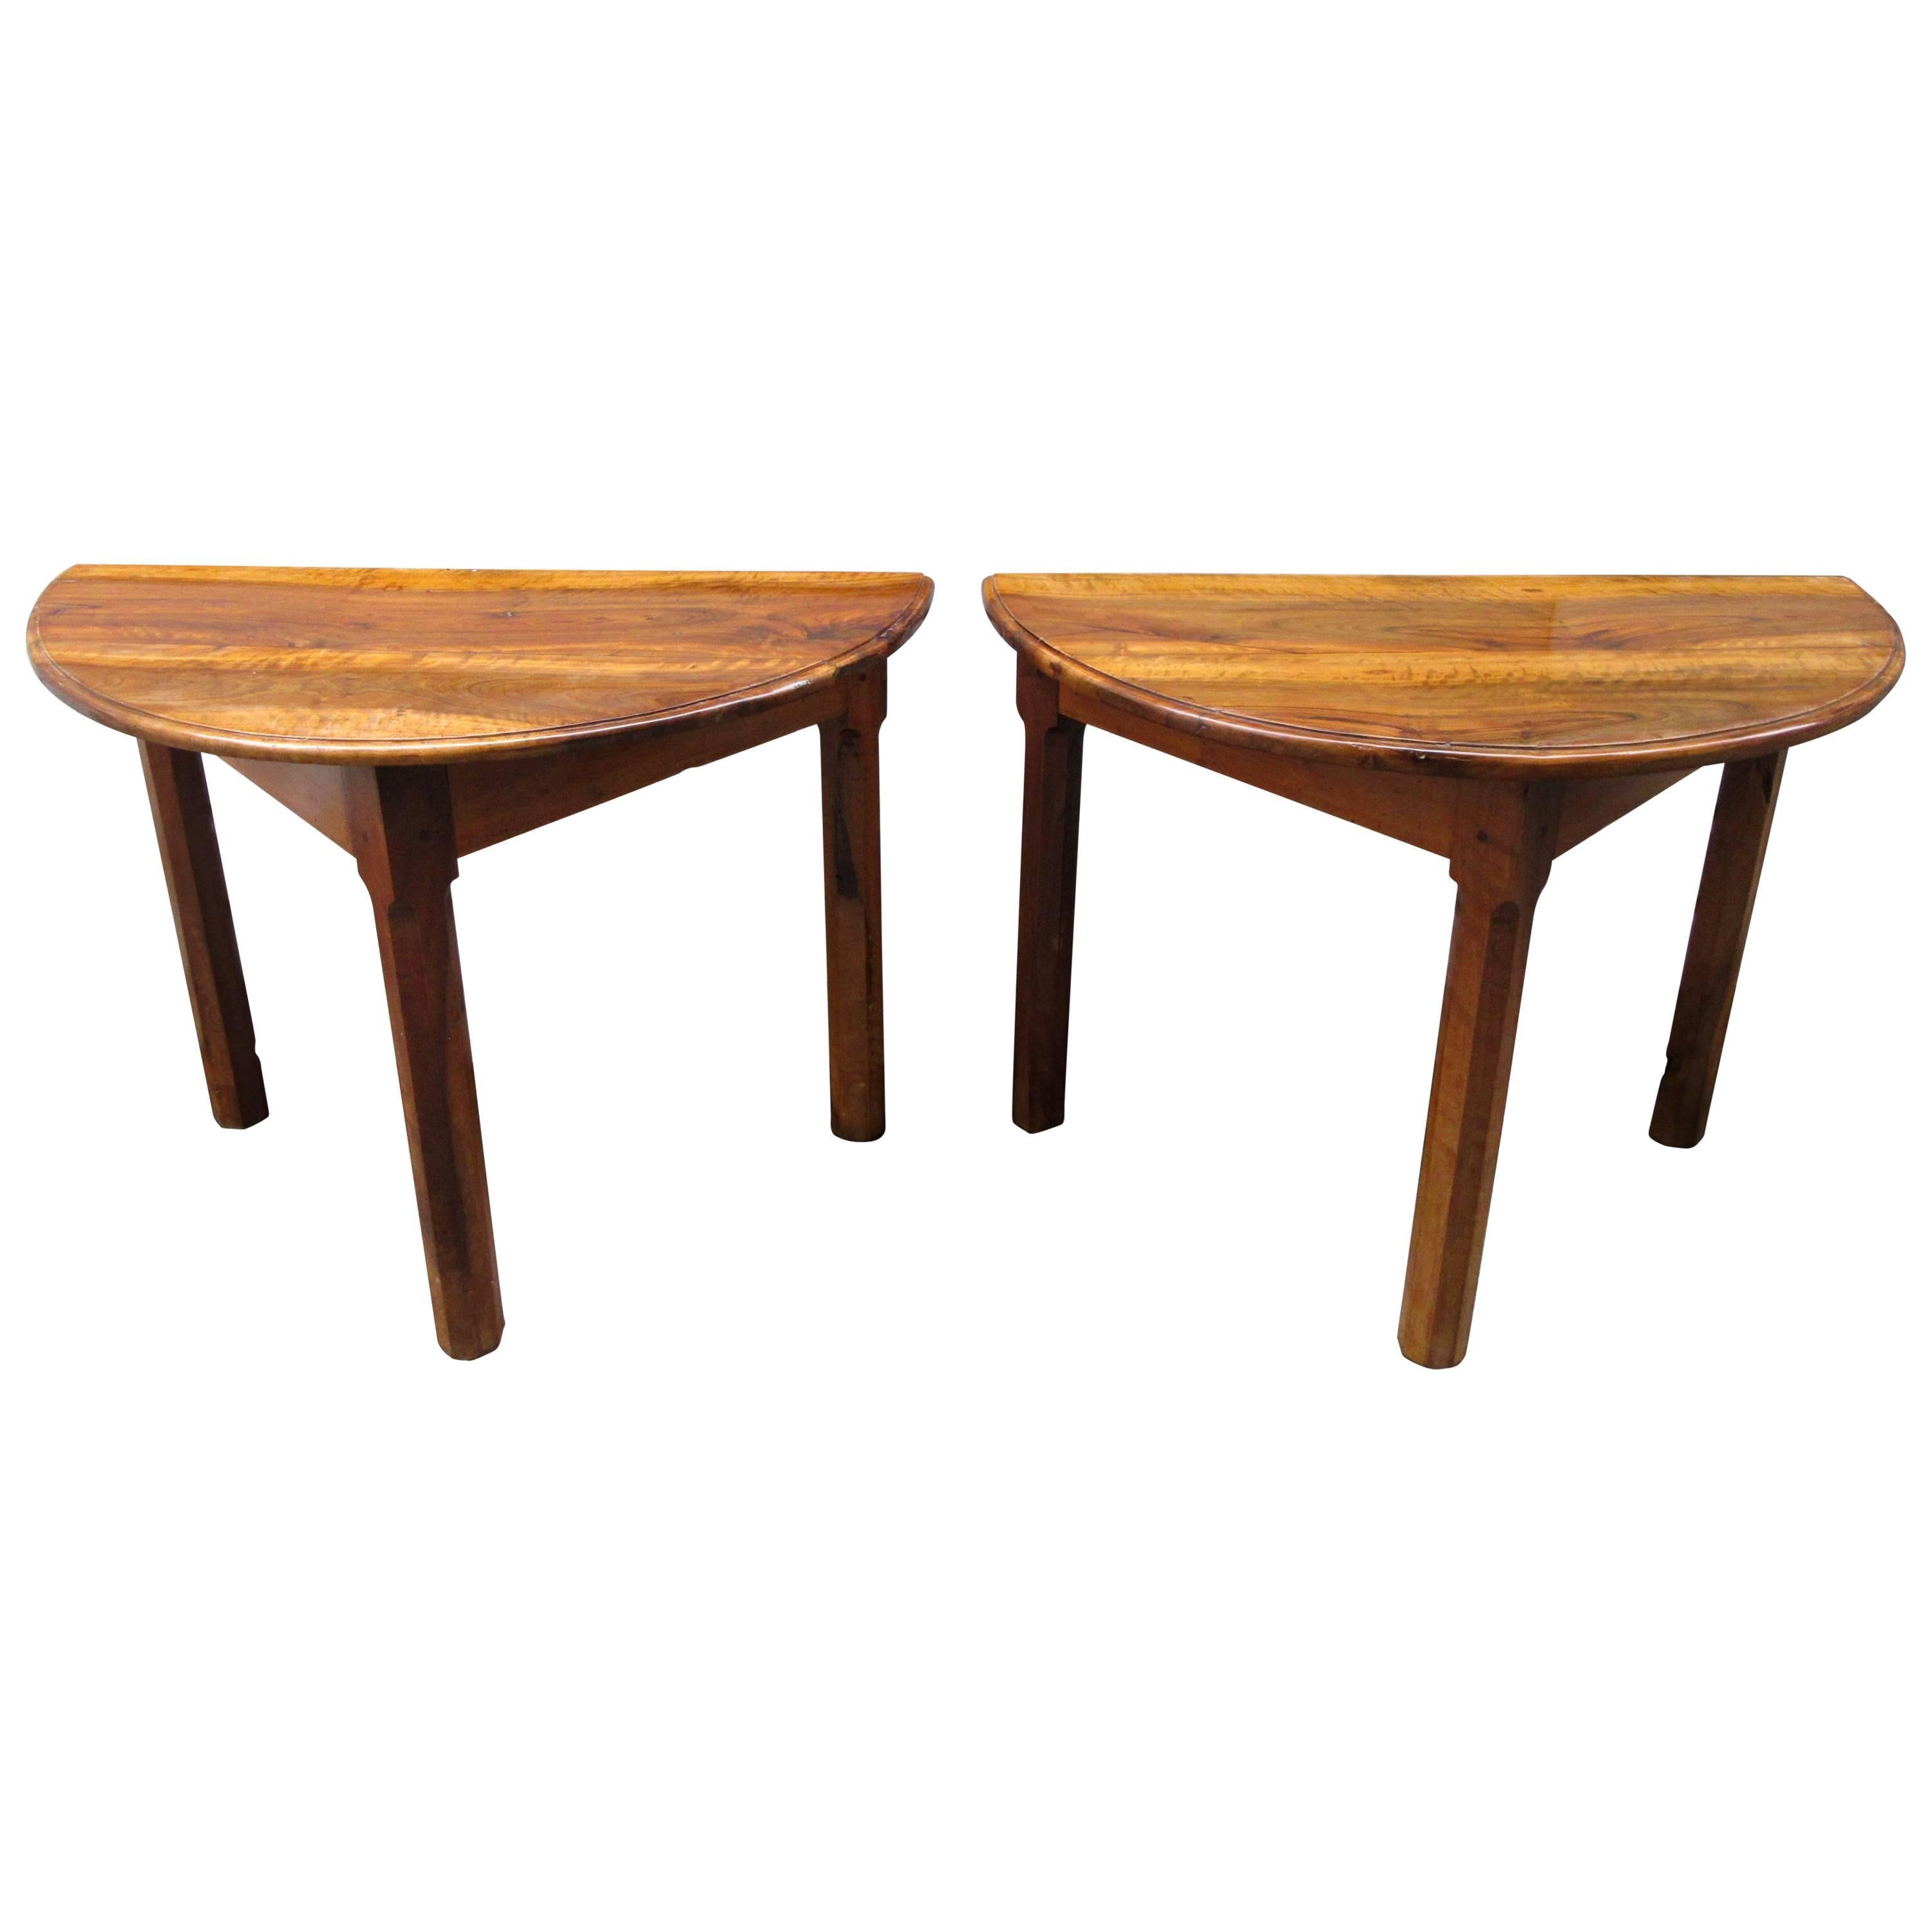 Pair of 18th Century French Provincial Fruitwood Demilune Tables